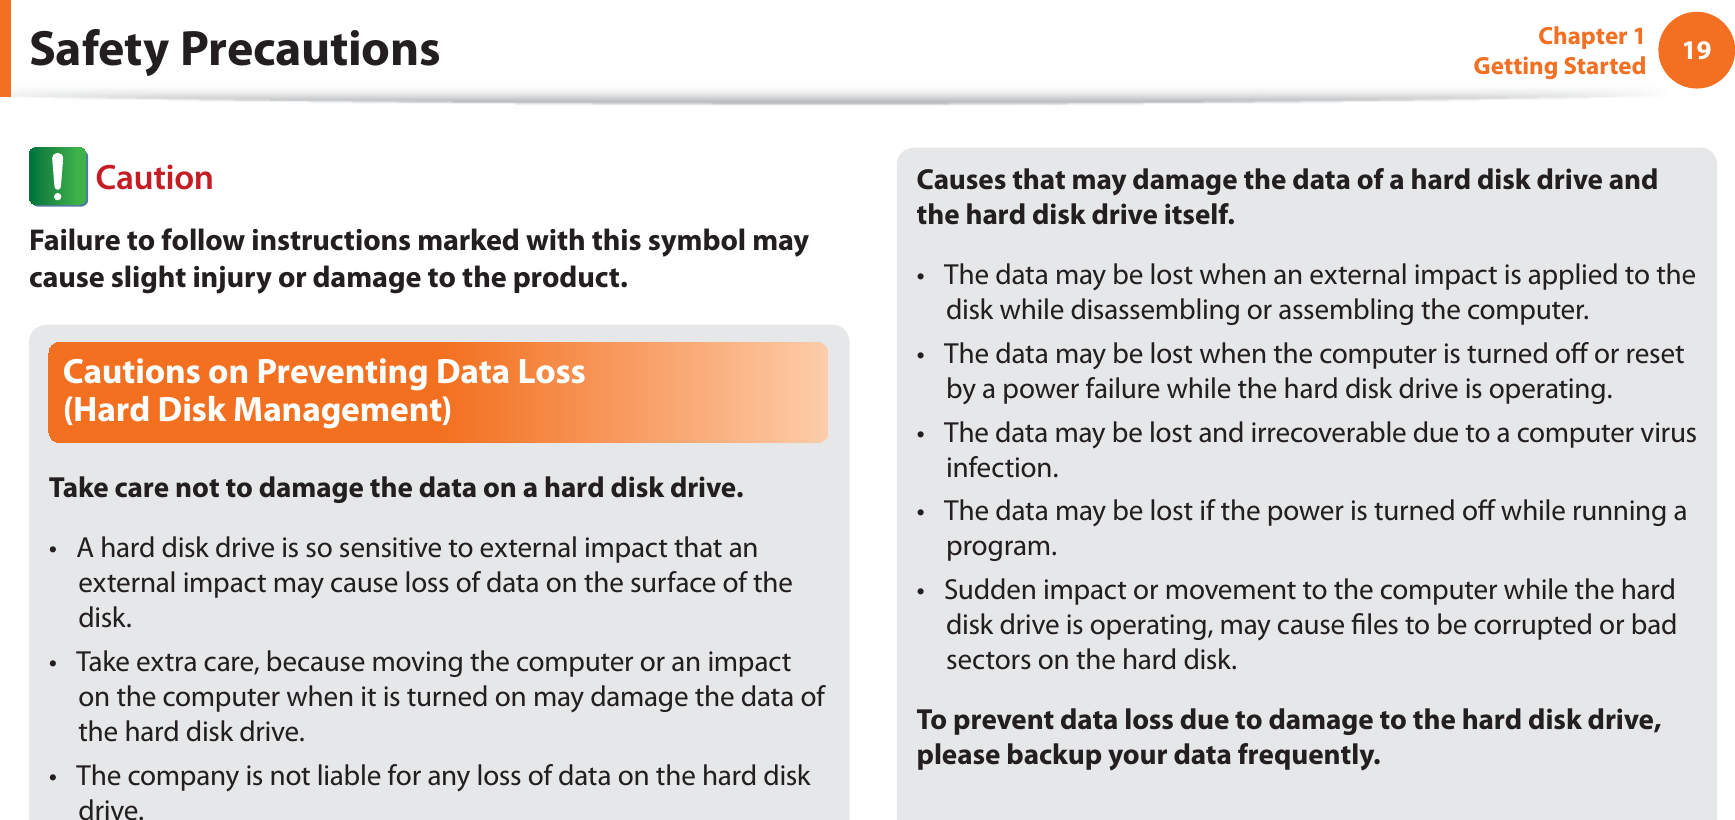 19Chapter 1 Getting StartedCautions on Preventing Data Loss  (Hard Disk Management)Take care not to damage the data on a hard disk drive.A hard disk drive is so sensitive to external impact that an t external impact may cause loss of data on the surface of the disk.Take extra care, because moving the computer or an impact t on the computer when it is turned on may damage the data of the hard disk drive.The company is not liable for any loss of data on the hard disk t drive.Causes that may damage the data of a hard disk drive and the hard disk drive itself.The data may be lost when an external impact is applied to the t disk while disassembling or assembling the computer.The data may be lost when the computer is turned o or reset t by a power failure while the hard disk drive is operating.The data may be lost and irrecoverable due to a computer virus t infection.The data may be lost if the power is turned o while running a t program.Sudden impact or movement to the computer while the hard t disk drive is operating, may cause les to be corrupted or bad sectors on the hard disk.To prevent data loss due to damage to the hard disk drive, please backup your data frequently.Safety Precautions CautionFailure to follow instructions marked with this symbol may cause slight injury or damage to the product.